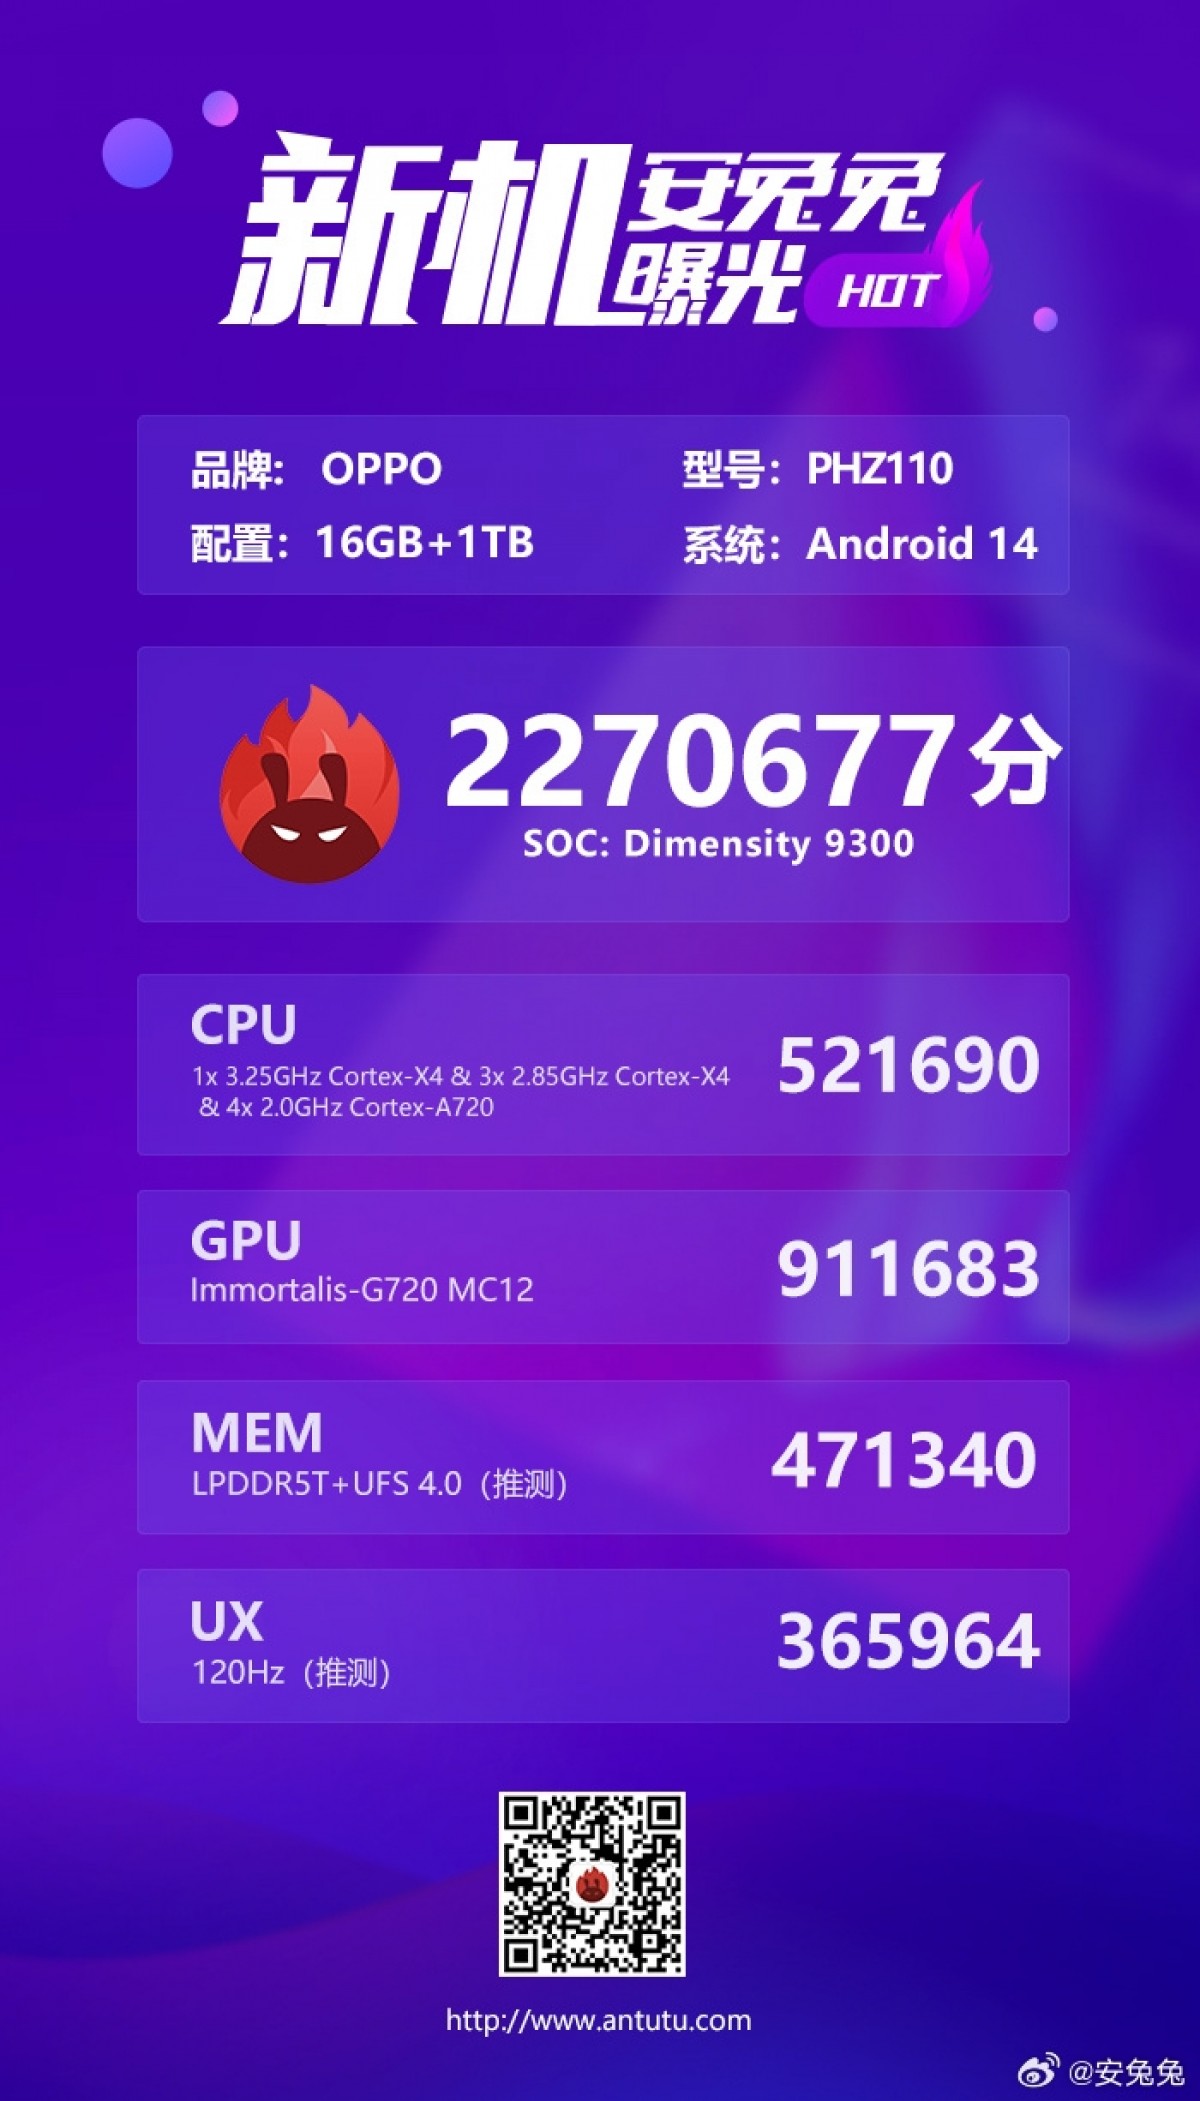 Oppo Find X7, fueled by Dimensity 9300, appears on AnTuTu with impressive score